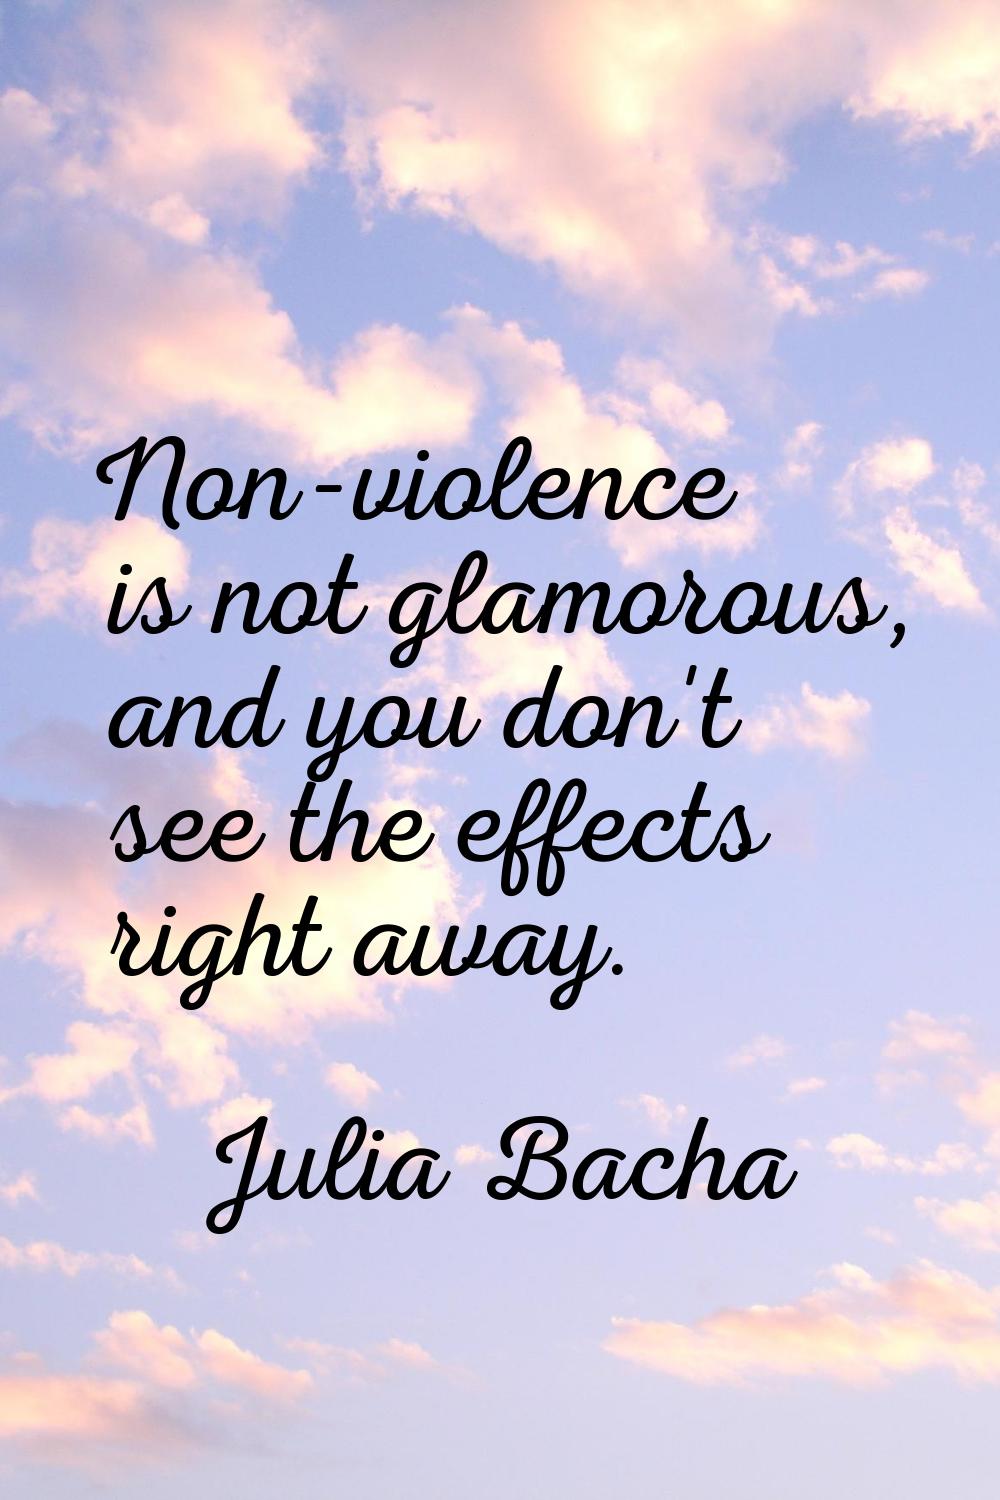 Non-violence is not glamorous, and you don't see the effects right away.